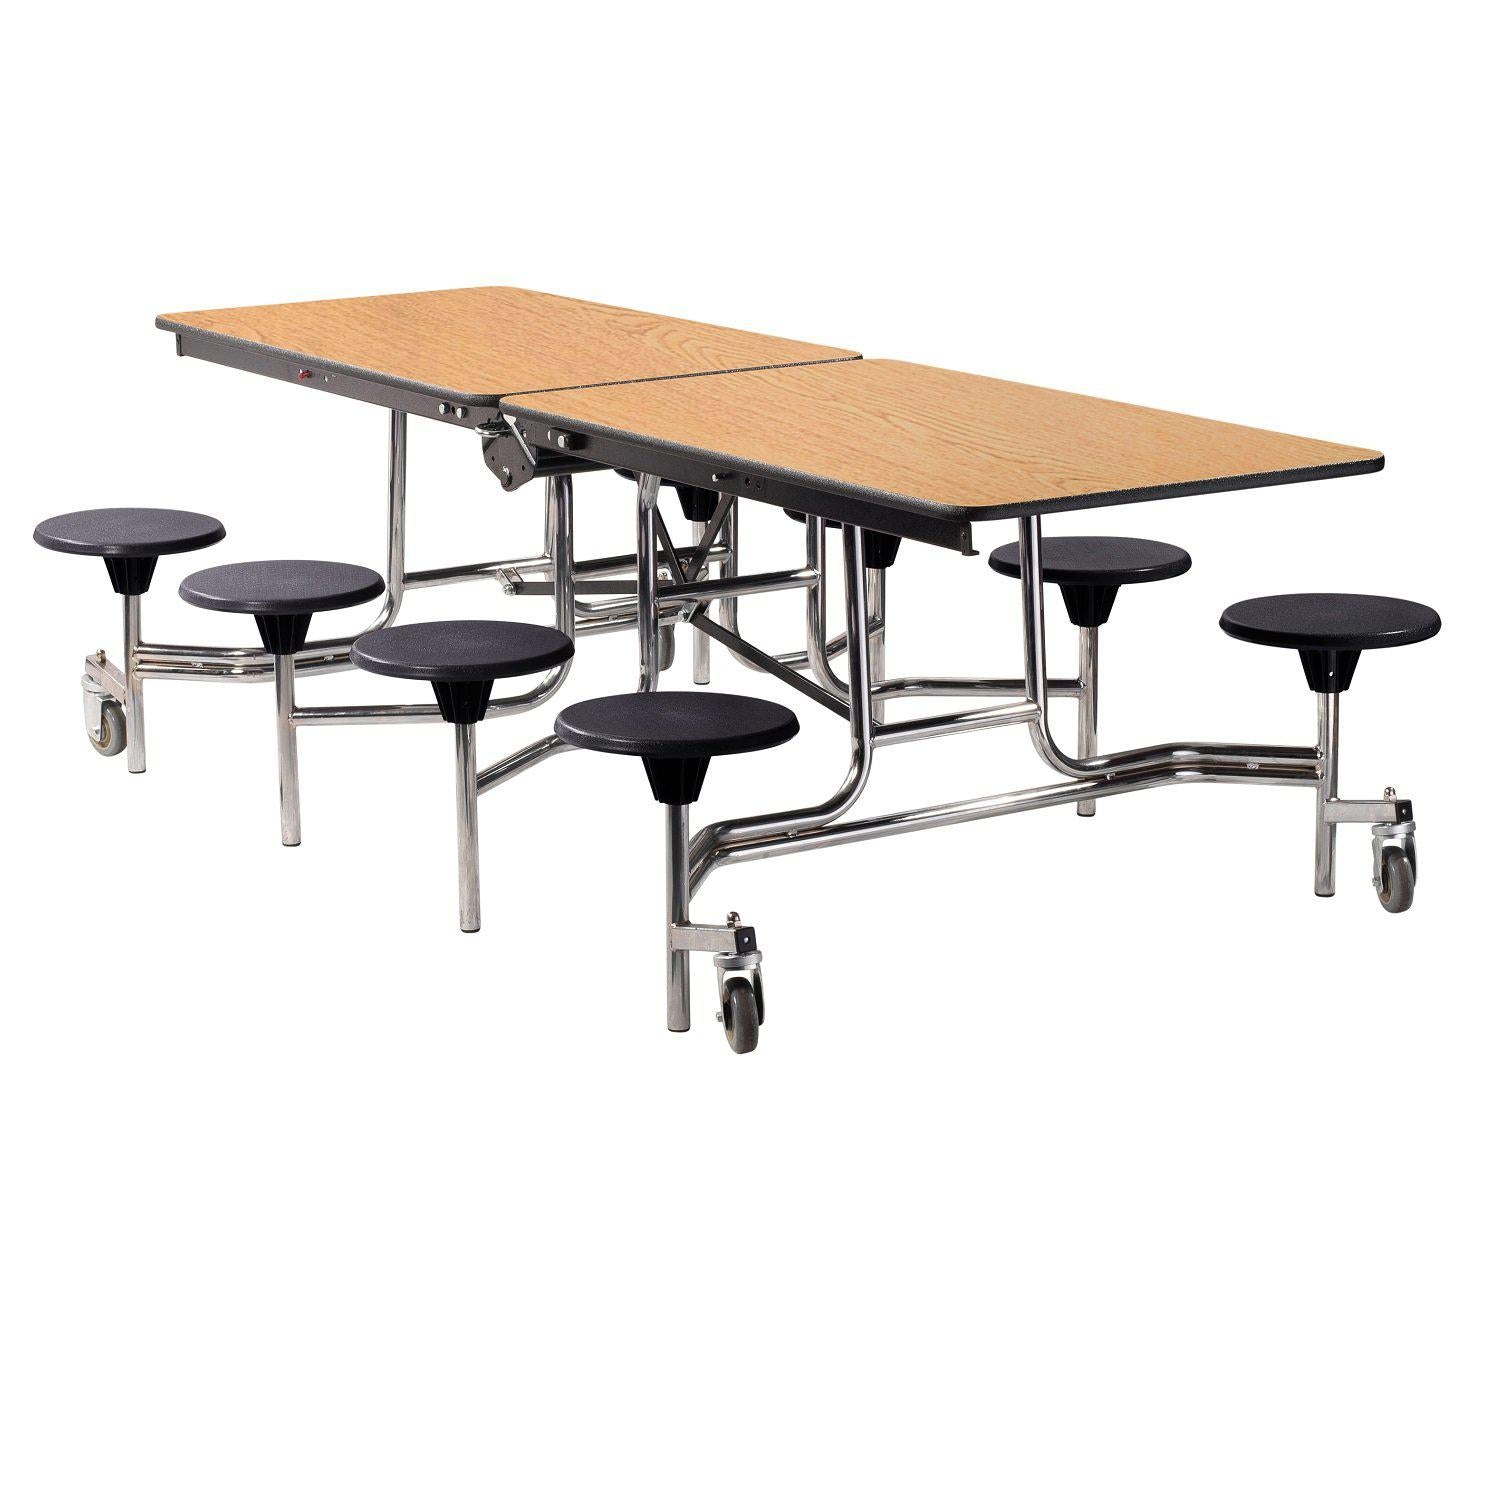 Mobile Cafeteria Table with 8 Stools, 8'L Rectangular, Plywood Core, Vinyl T-Mold Edge, Chrome Frame